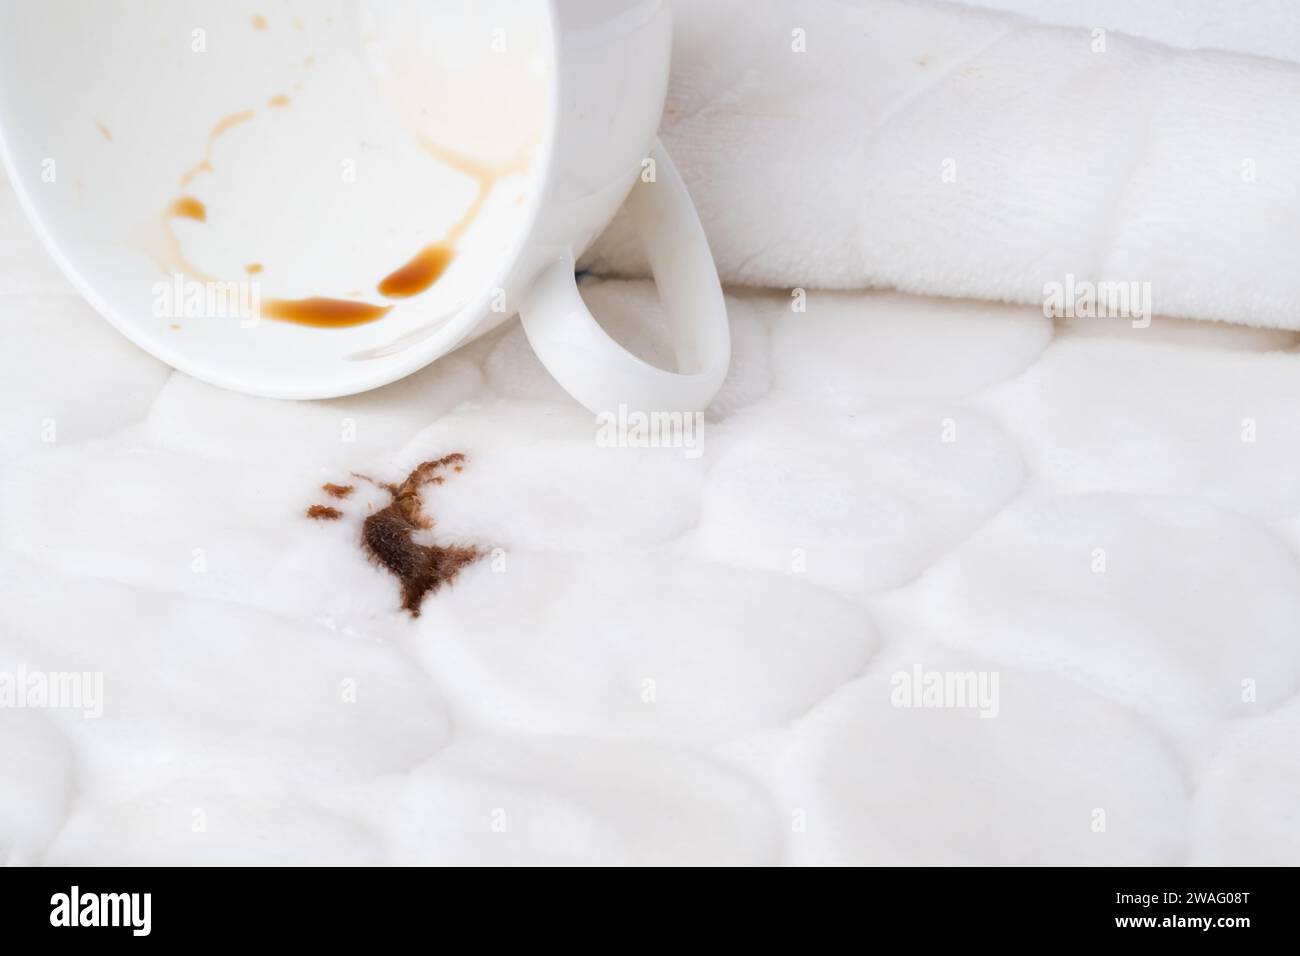 Spilled coffee on the upholstery of the couch or carpet. dirty stains in daily life for cleaning concept. Stock Photo